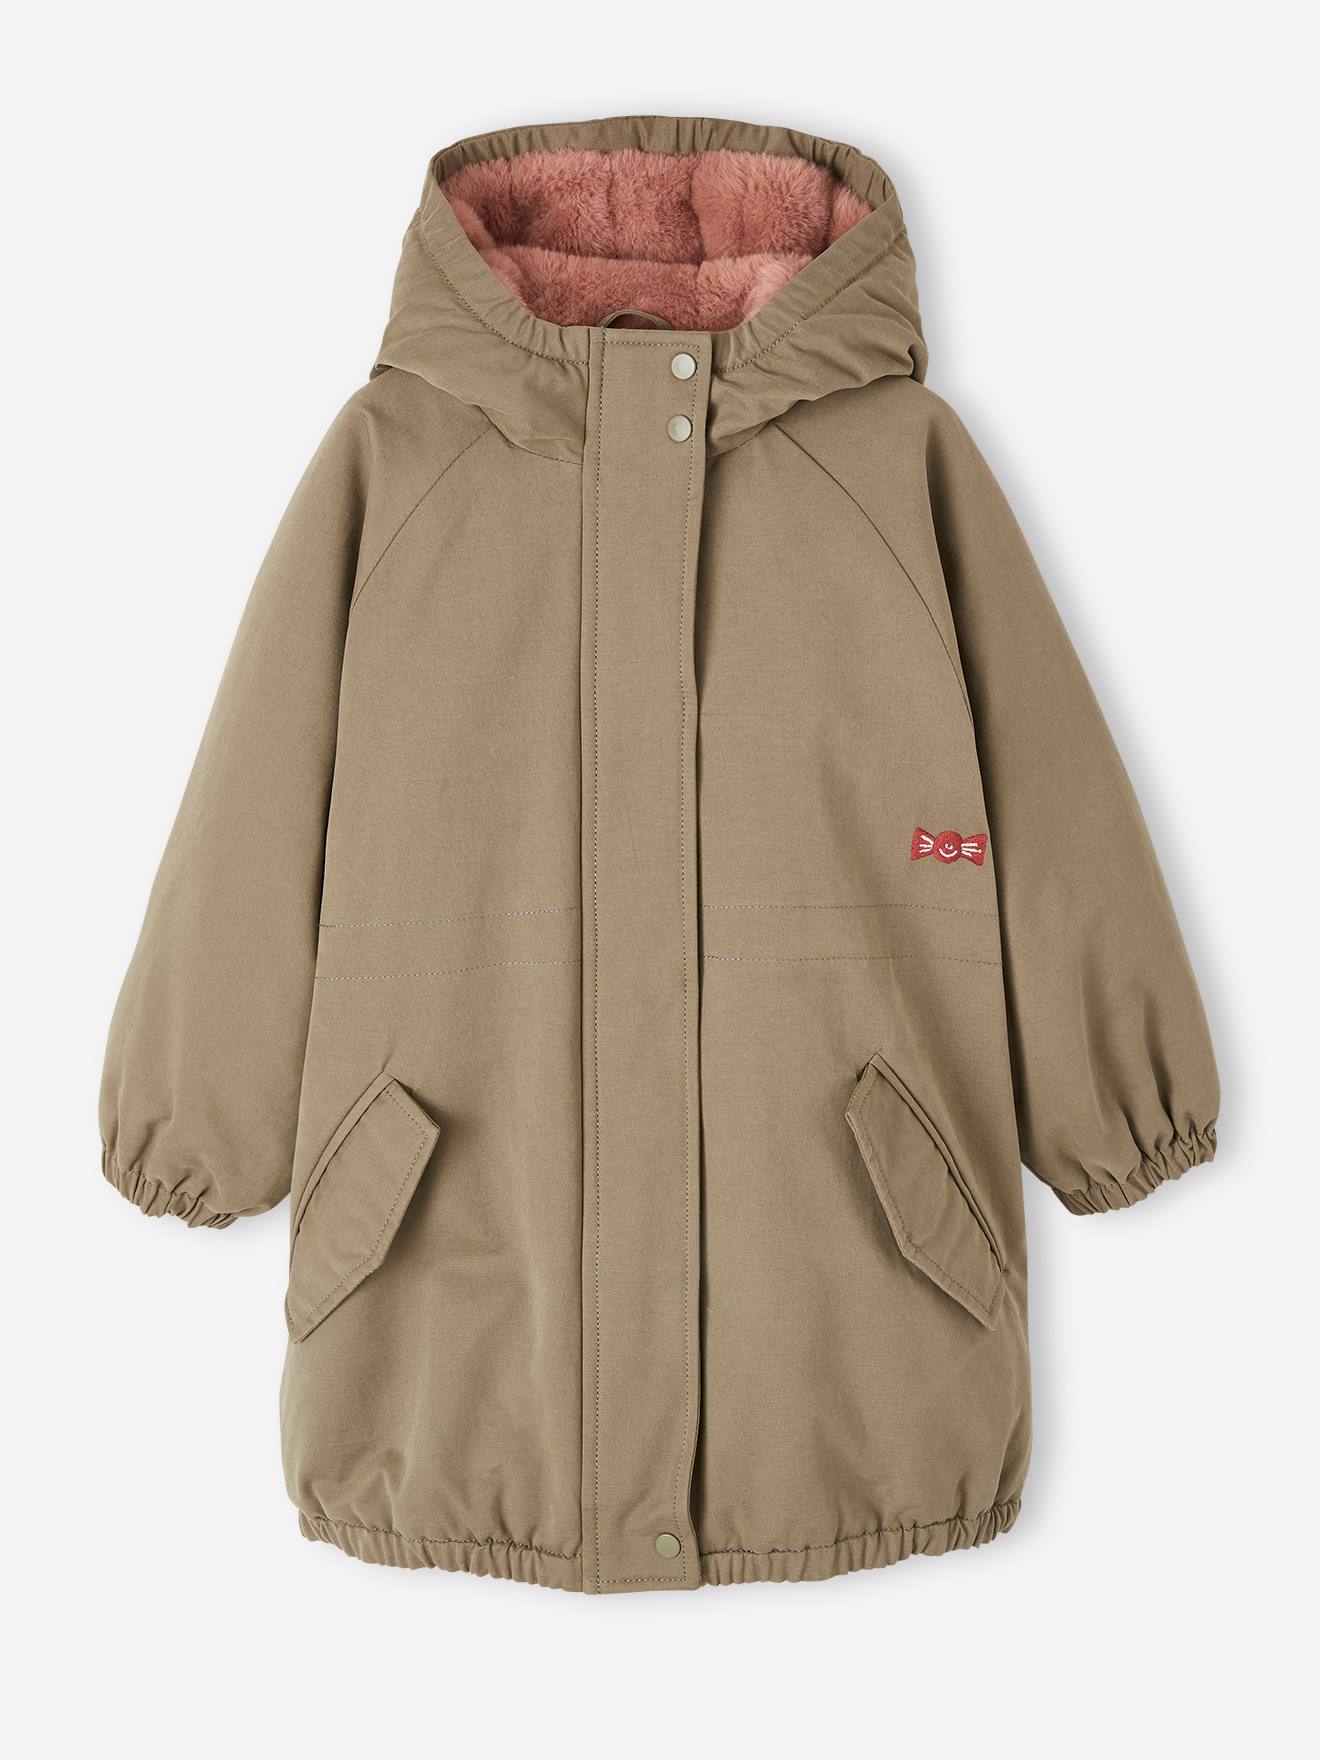 Hooded Parka with Faux Fur Lining for Girls khaki